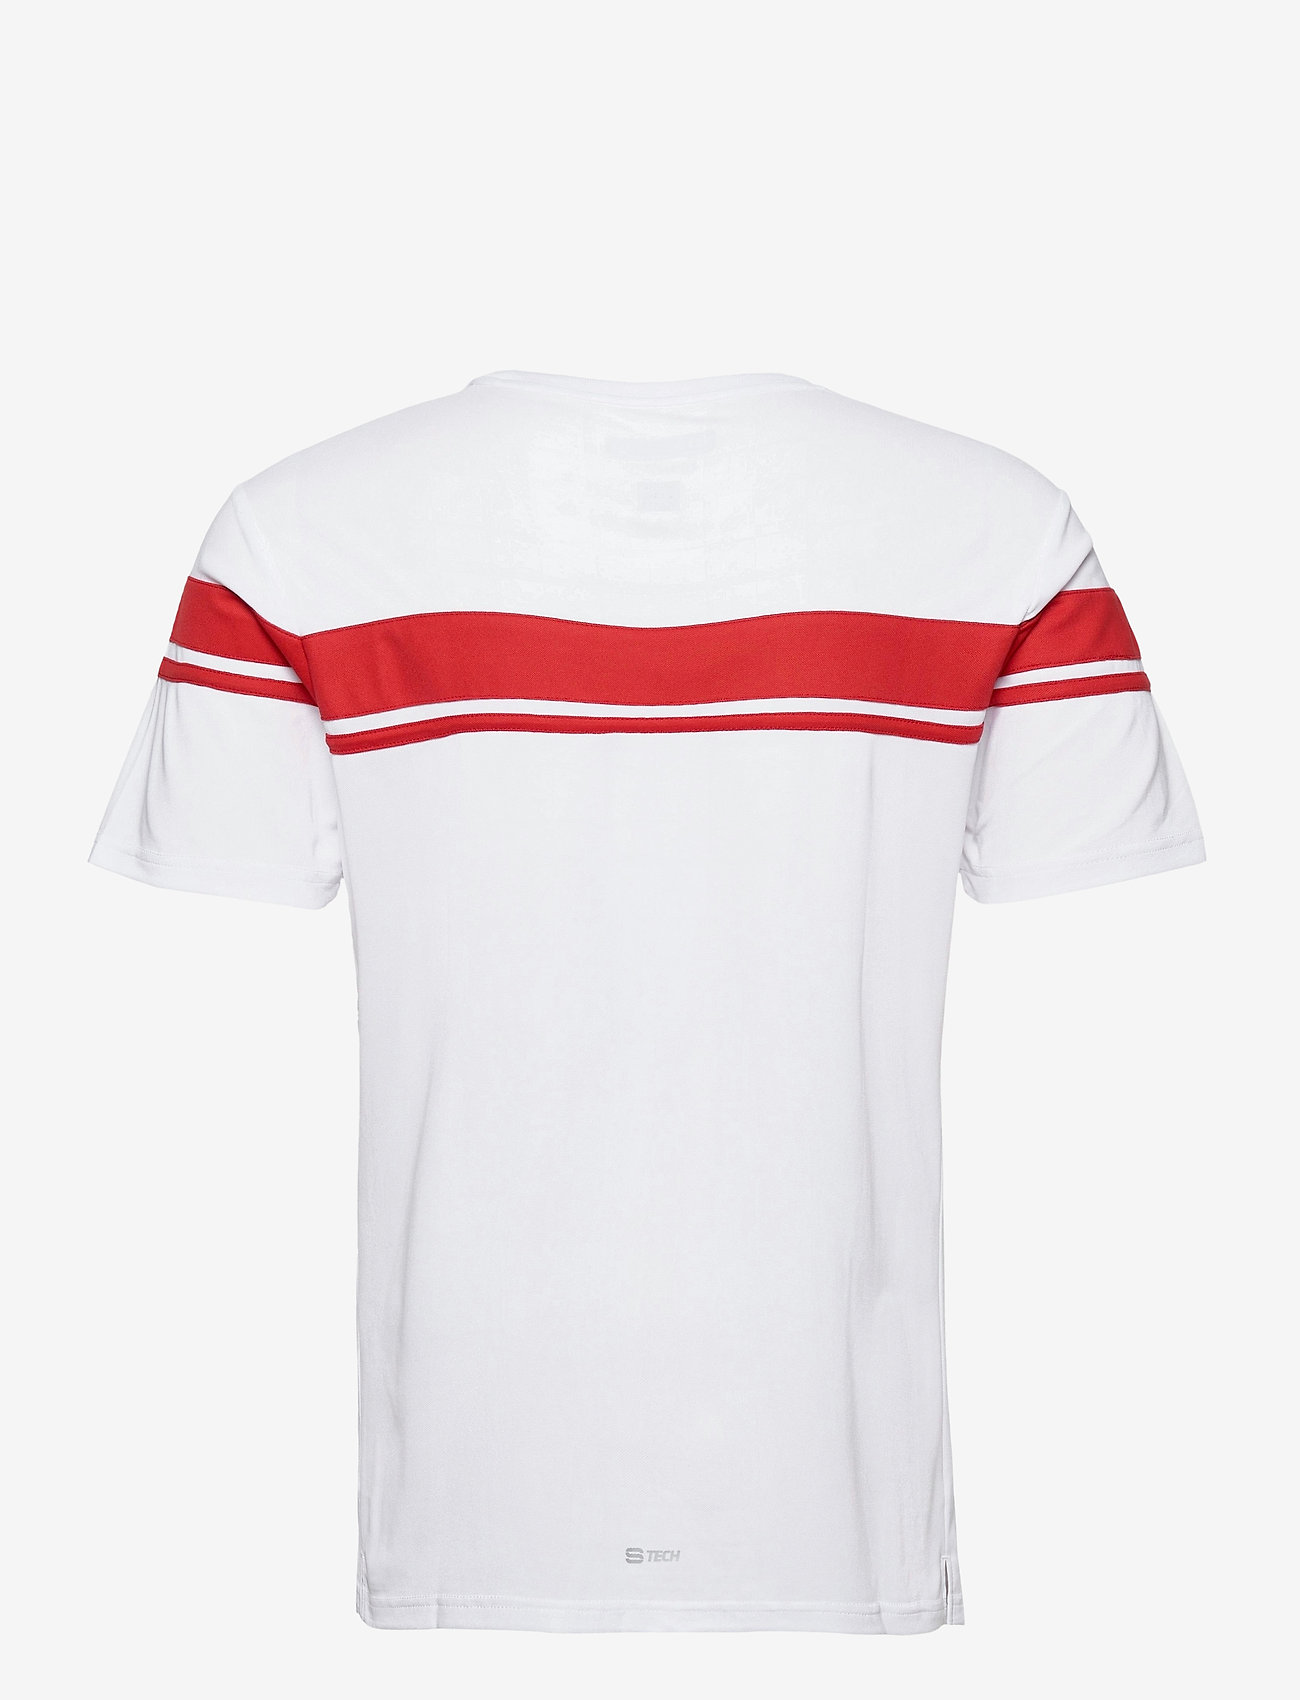 Sergio Tacchini - YOUNG LINE PRO T-SHIRT - short-sleeved t-shirts - white/red - 1